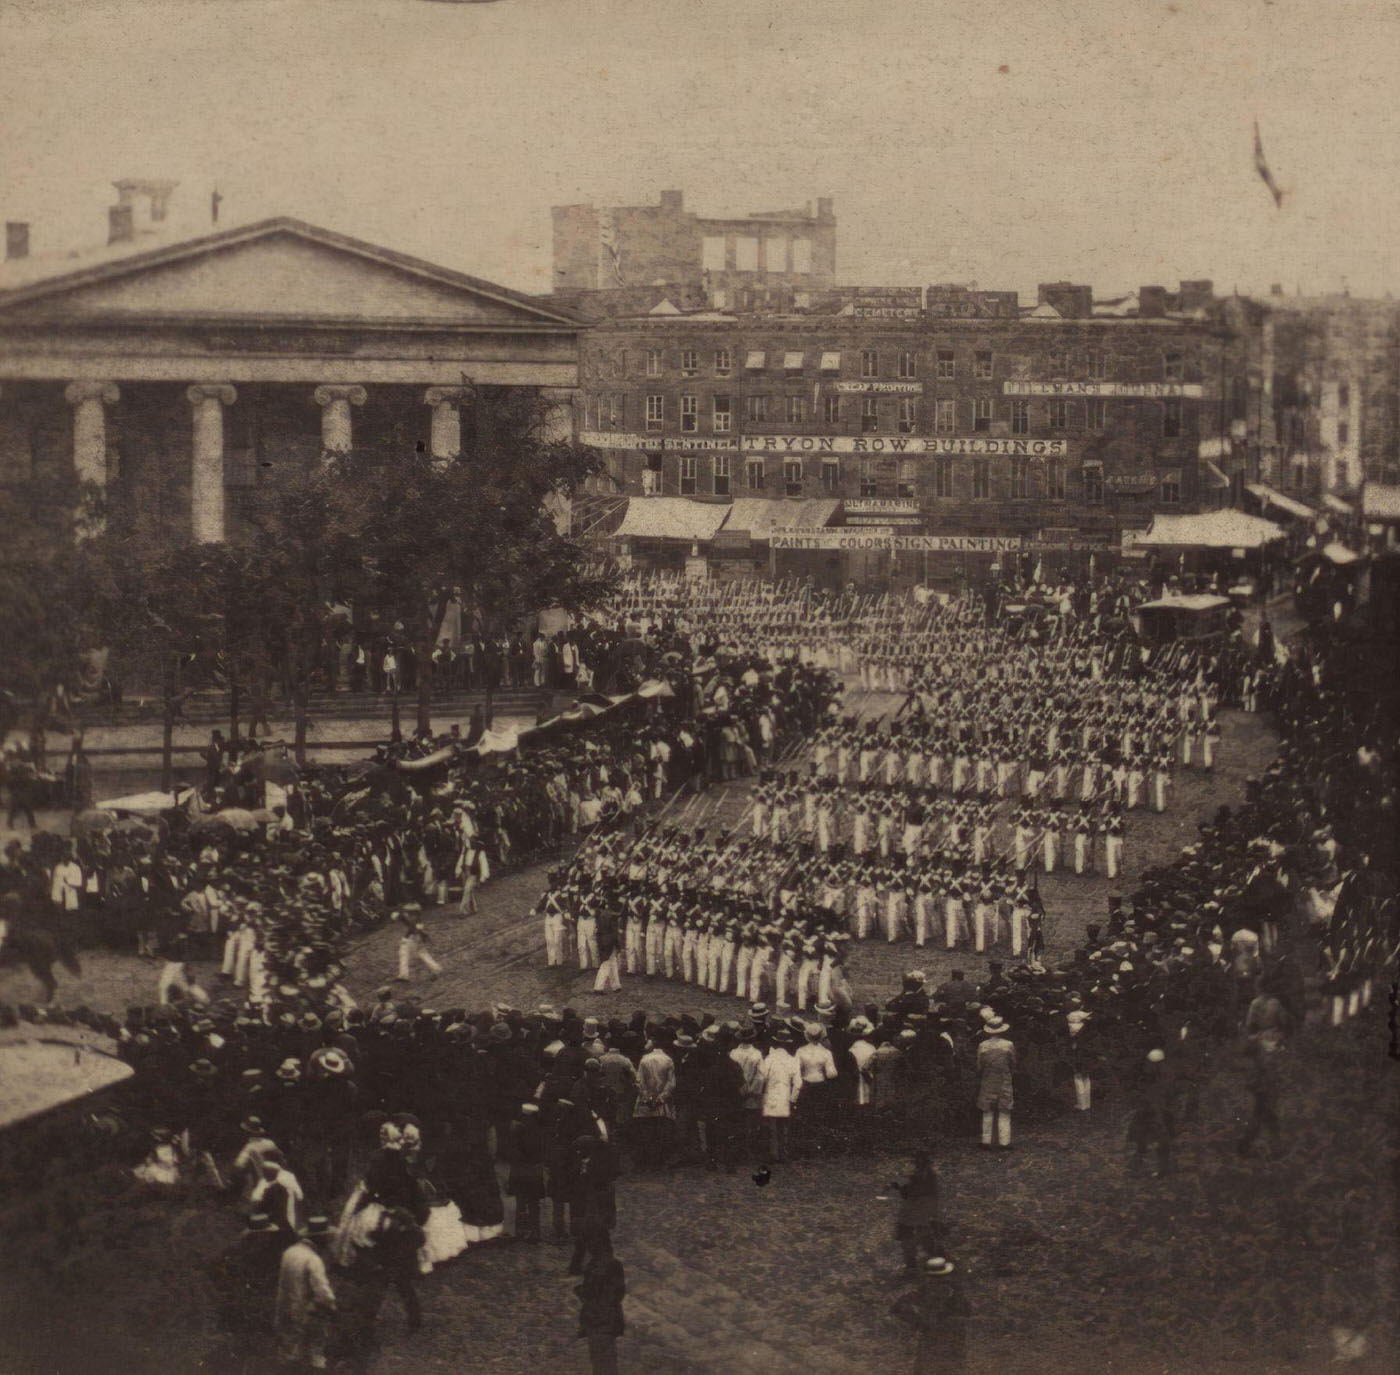 Troops Entering The Park From Tryon Row, City Hall Park, Manhattan, New York City, 1860